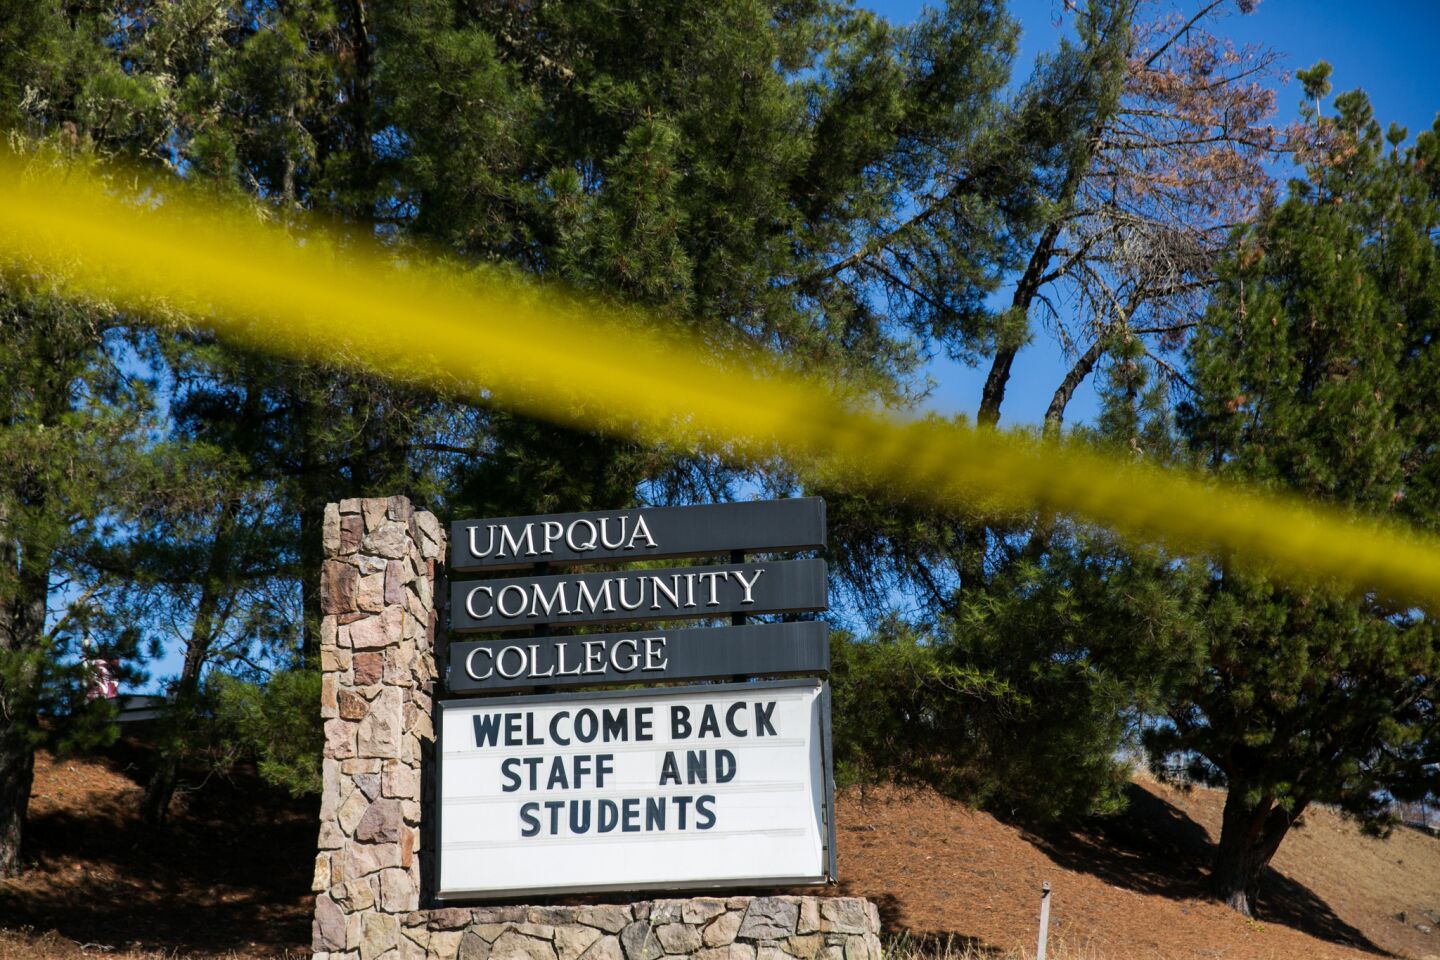 Despite the campus being taped off by police, Umpqua Community College reopened a few days after the shooting.